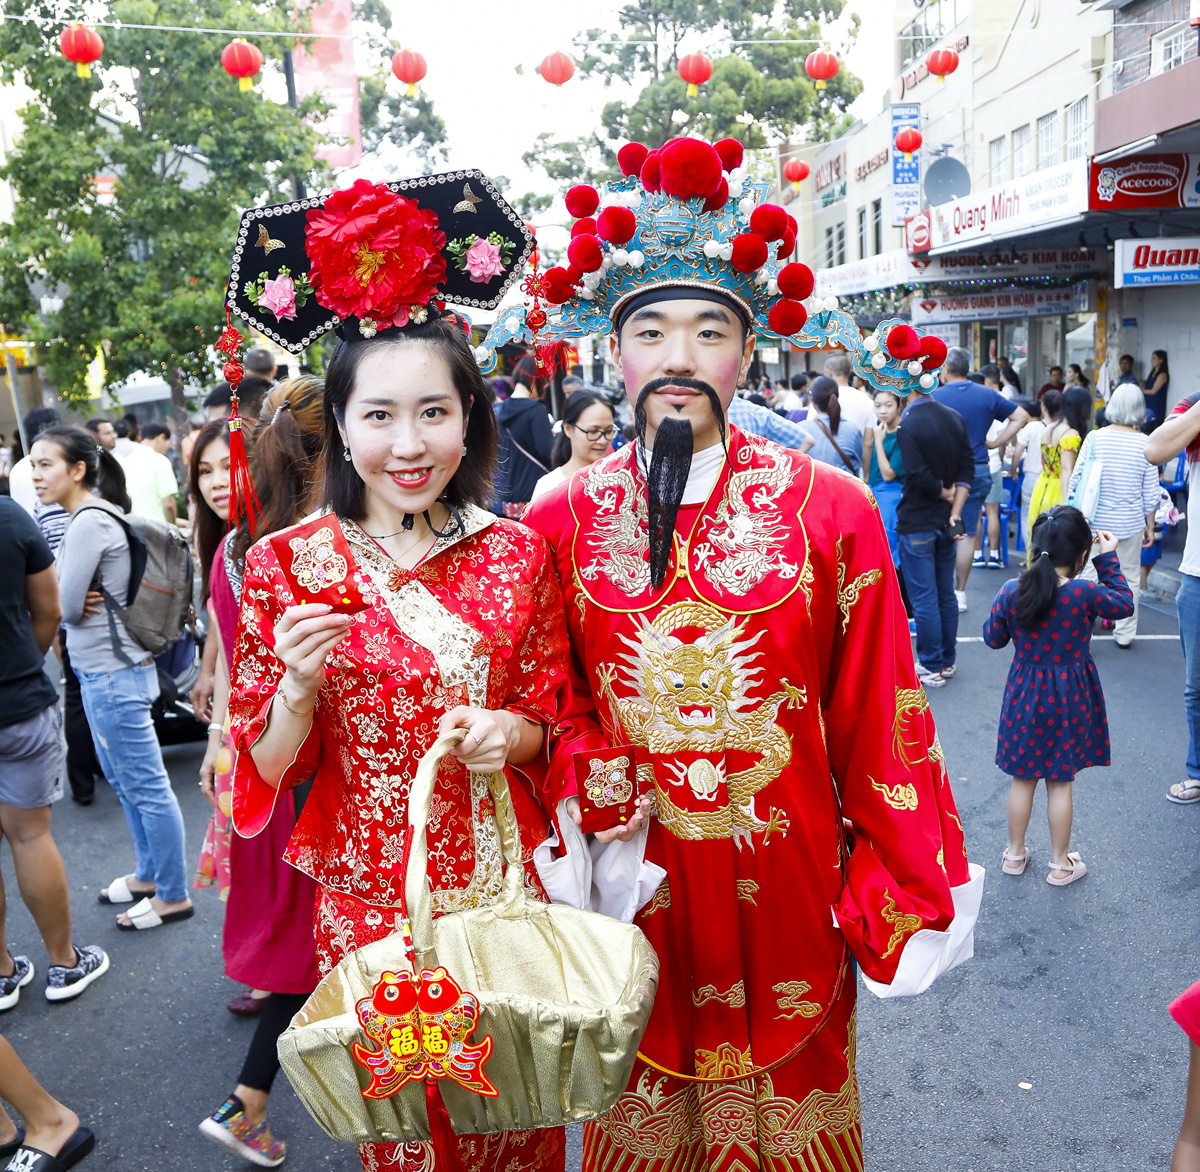 Thousands boost luck at Lunar New Year party LocalNewsPlus